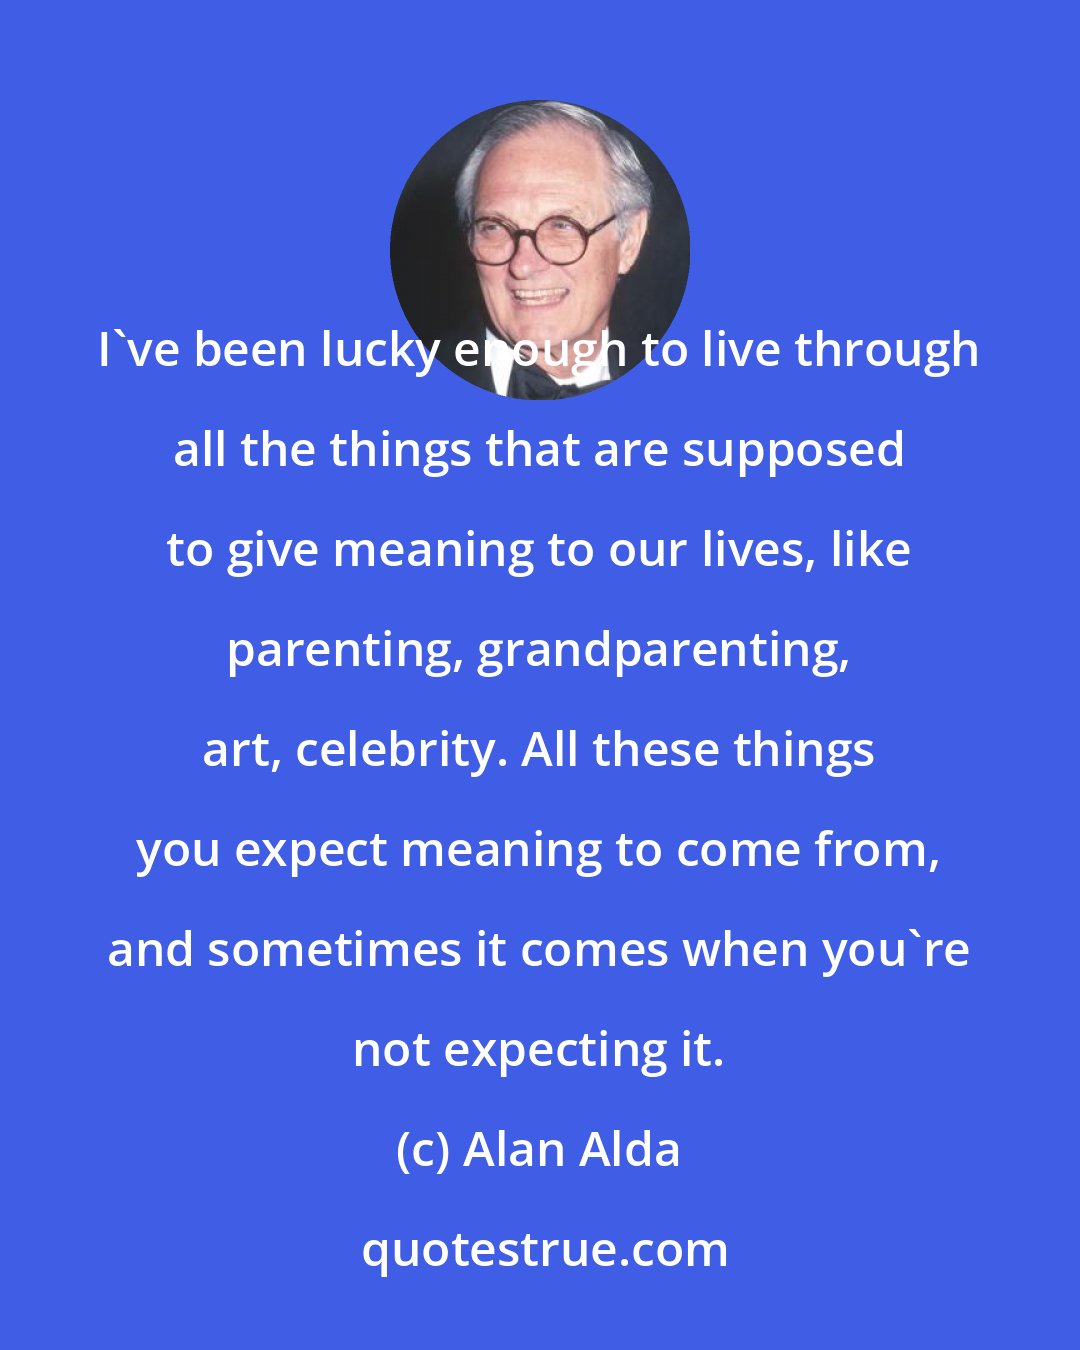 Alan Alda: I've been lucky enough to live through all the things that are supposed to give meaning to our lives, like parenting, grandparenting, art, celebrity. All these things you expect meaning to come from, and sometimes it comes when you're not expecting it.